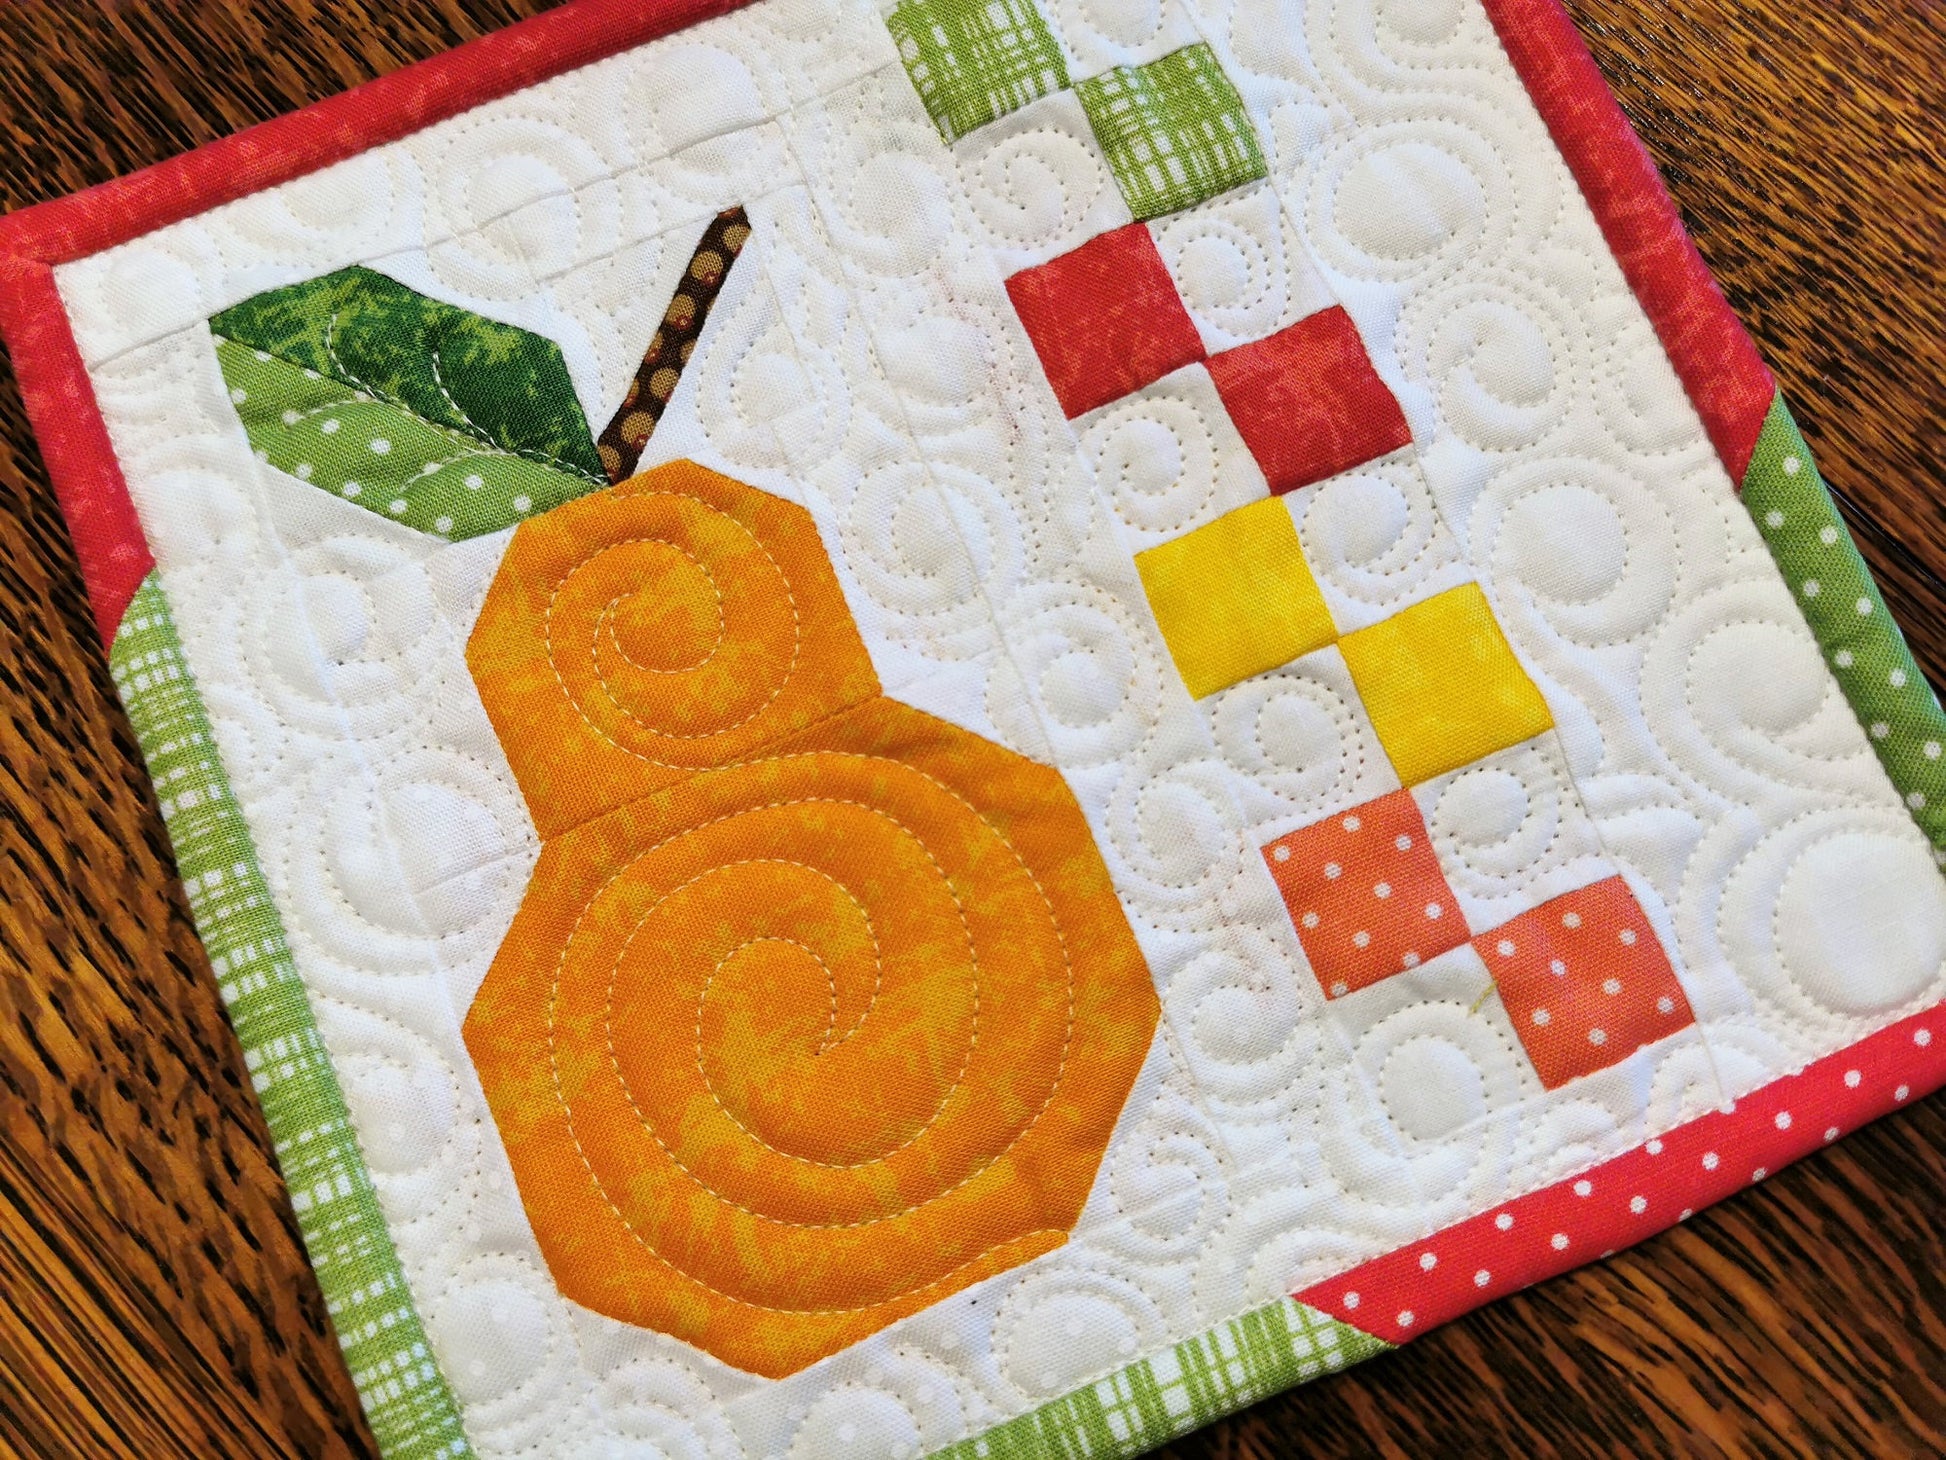 This bright orange patchwork pear is made of small, intricate piecing. Bright primary colors make up the rest of the patchwork piecing on a white background filled with custom quilting. Colors include red, green, yellow, coral pink.